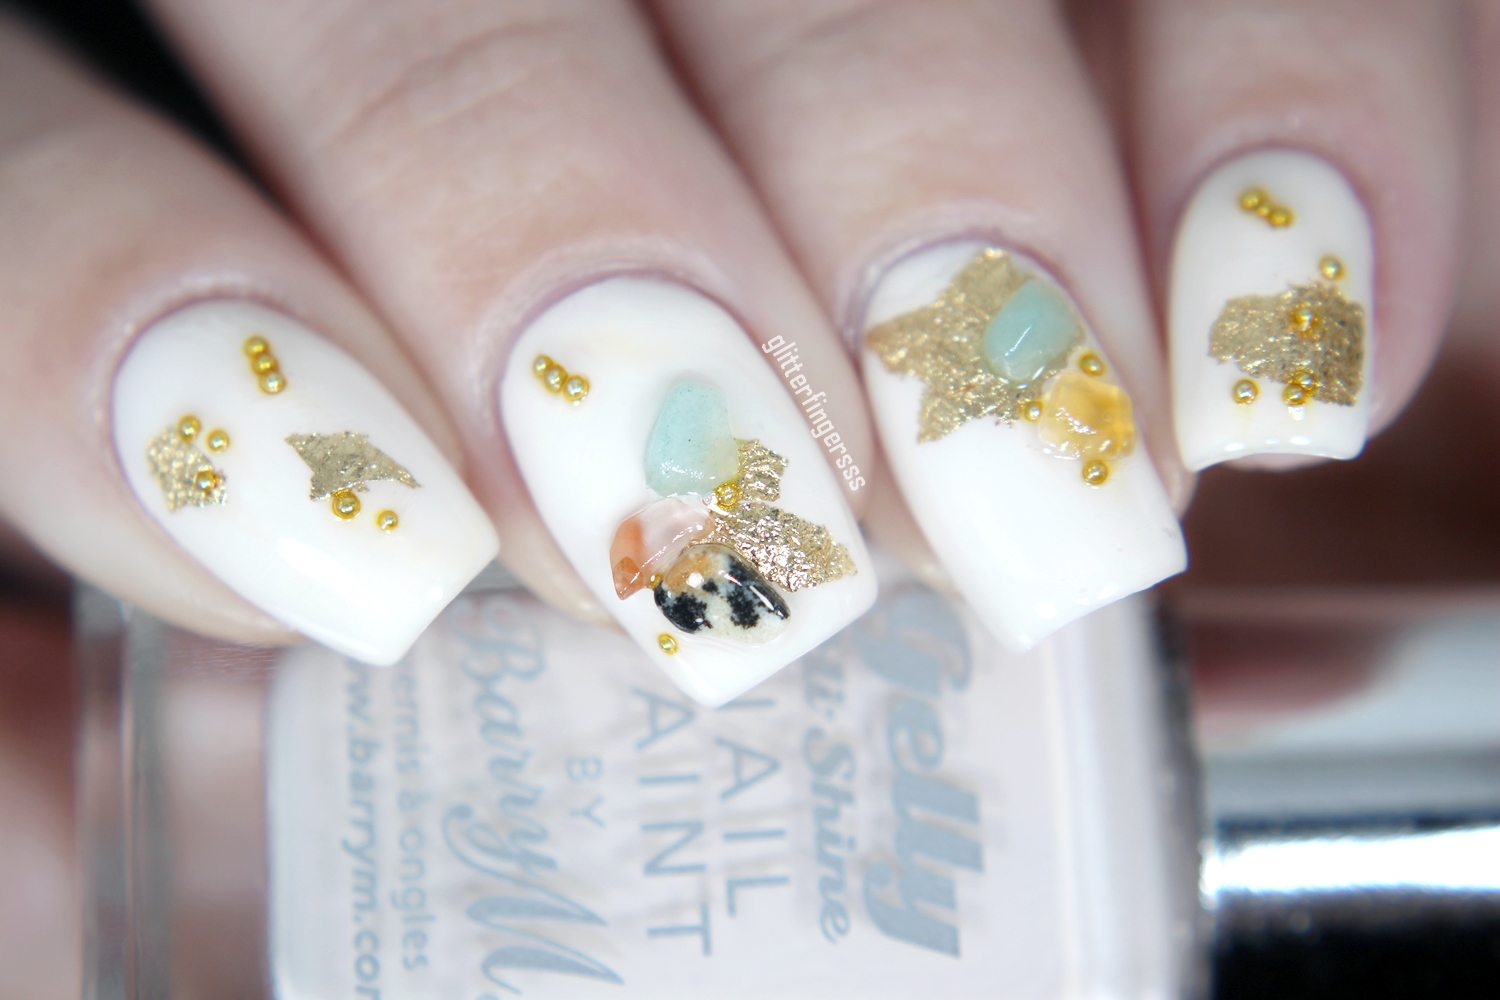 10. Stone Cluster Nail Art - wide 1